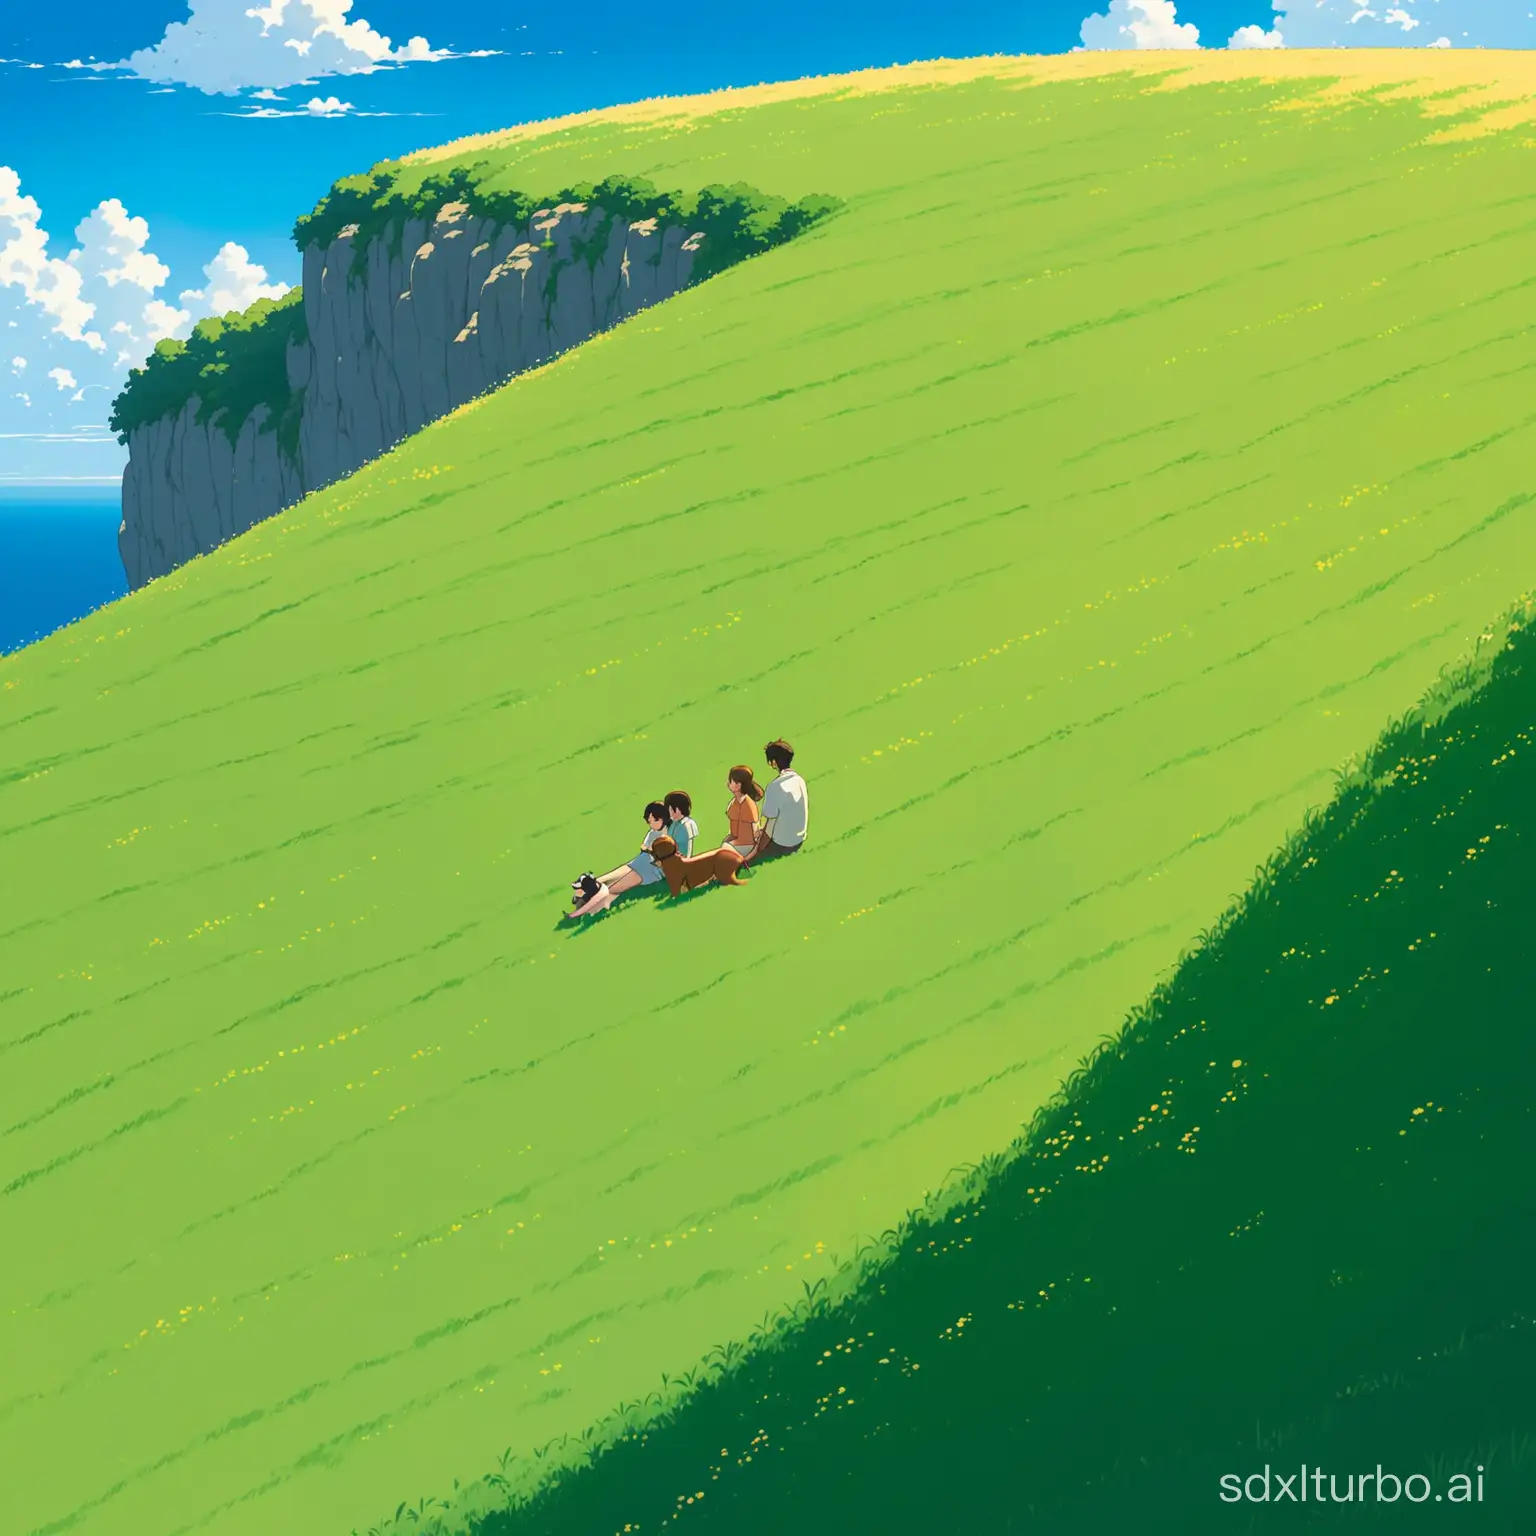 studio ghibli style: A huge field on top of a cliff, only two people are visible: A guy and a girl lie in the grass next to each other with their dog, watching the sky, there are some shadows of clouds to be seen on the field, it's sunny and the vibe is peaceful, both are laughing